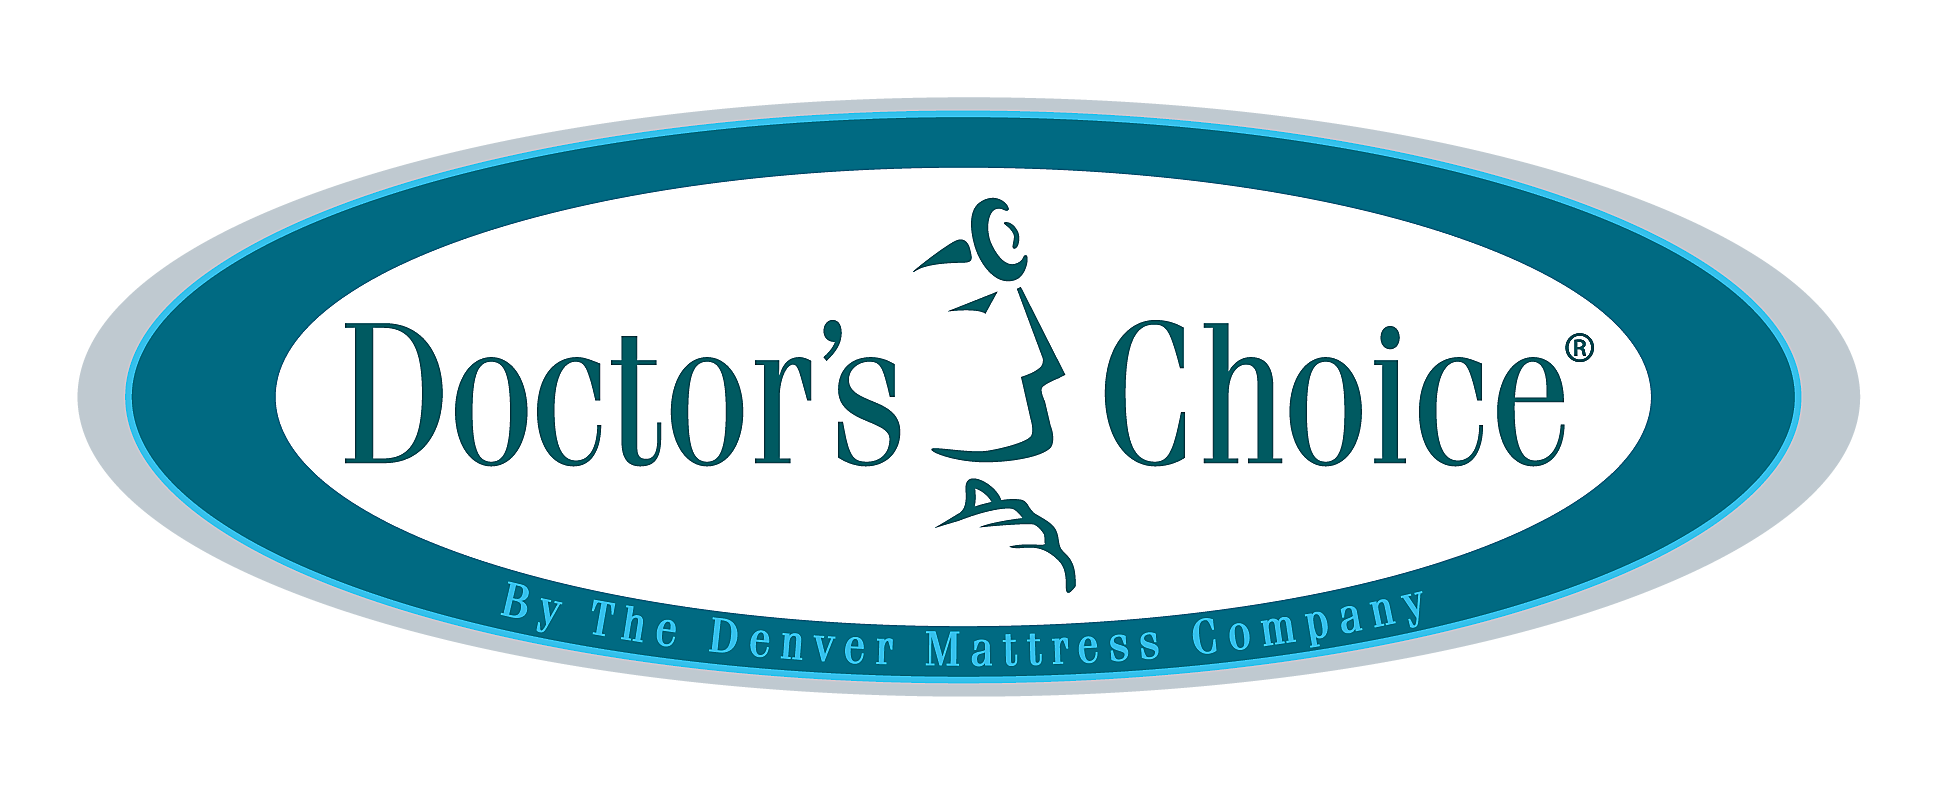 Doctor's Choice | By The Denver Mattress Company